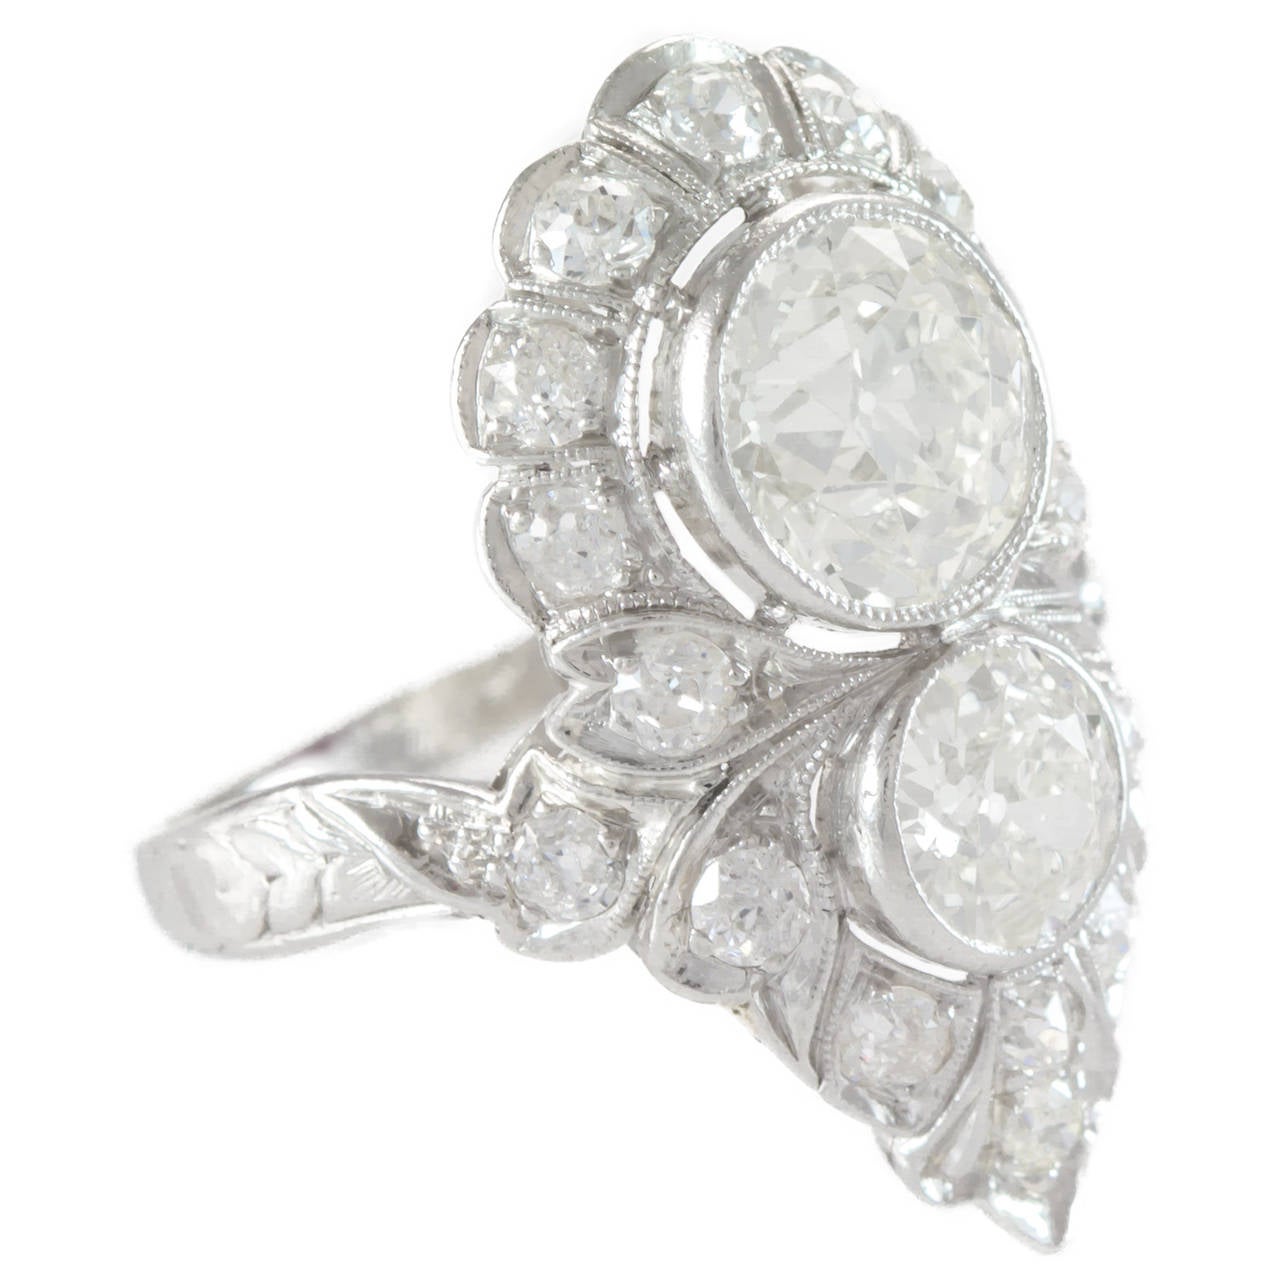 Lady's Art Deco Two-Stone Dinner Ring features a 2.0 carat Old European cut diamond punctuated by a 0.90 cart Old European Cut diamond. These stones are surrounded by a melange of single cut diamonds with an approximate weight of 1.0 carats. While